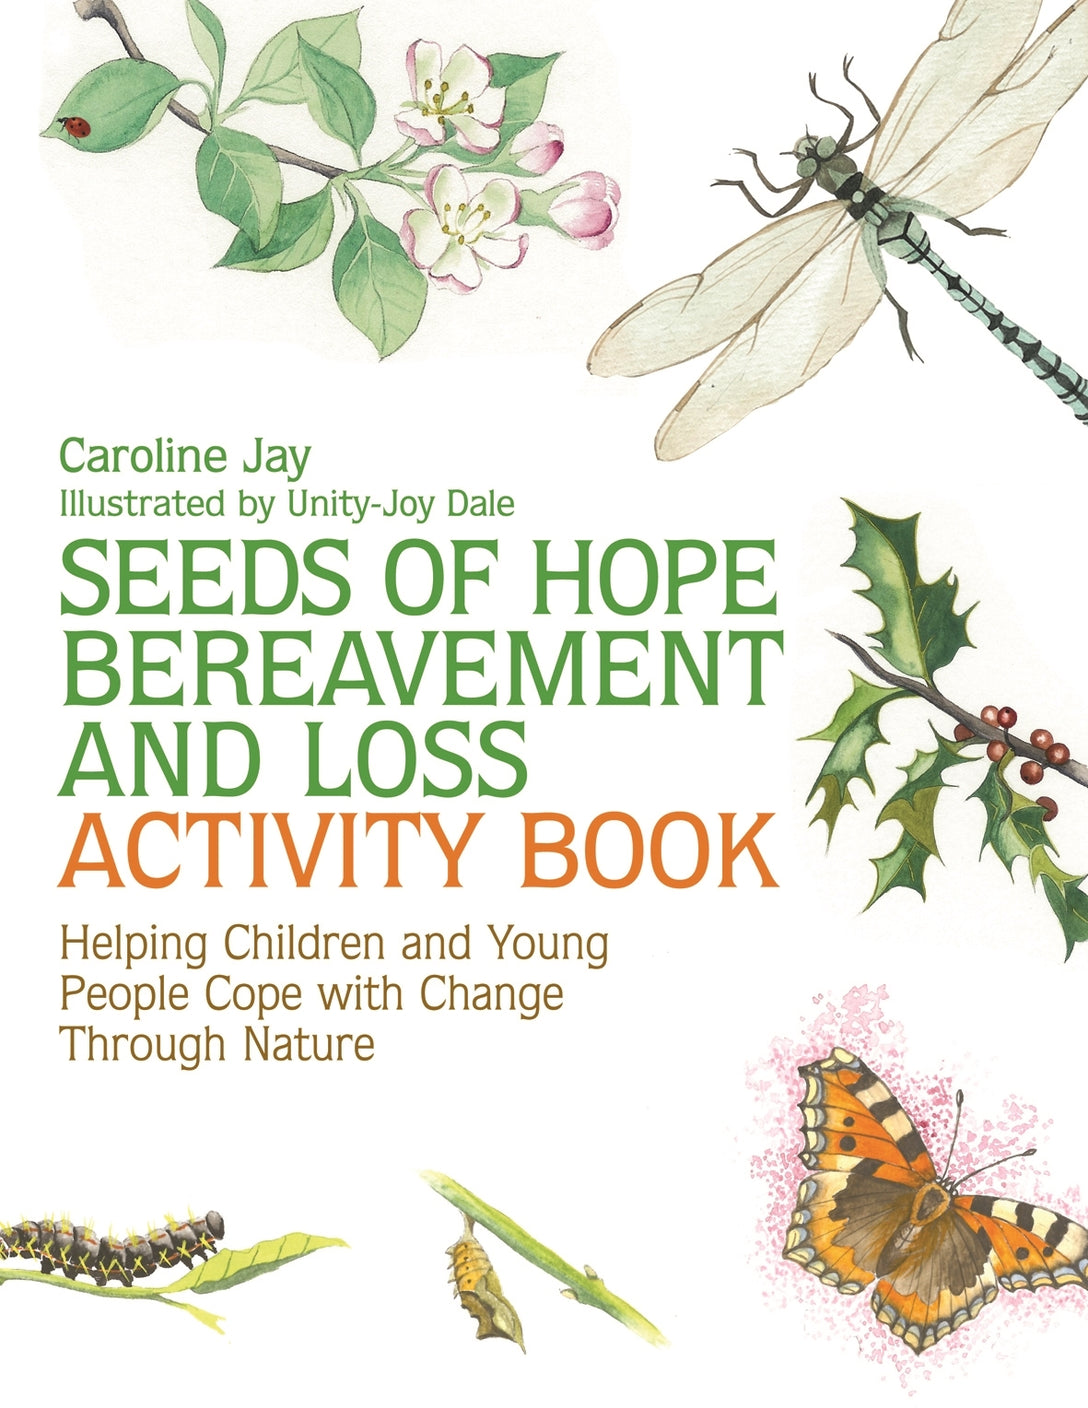 Seeds of Hope Bereavement and Loss Activity Book by Caroline Jay, Unity-Joy Dale